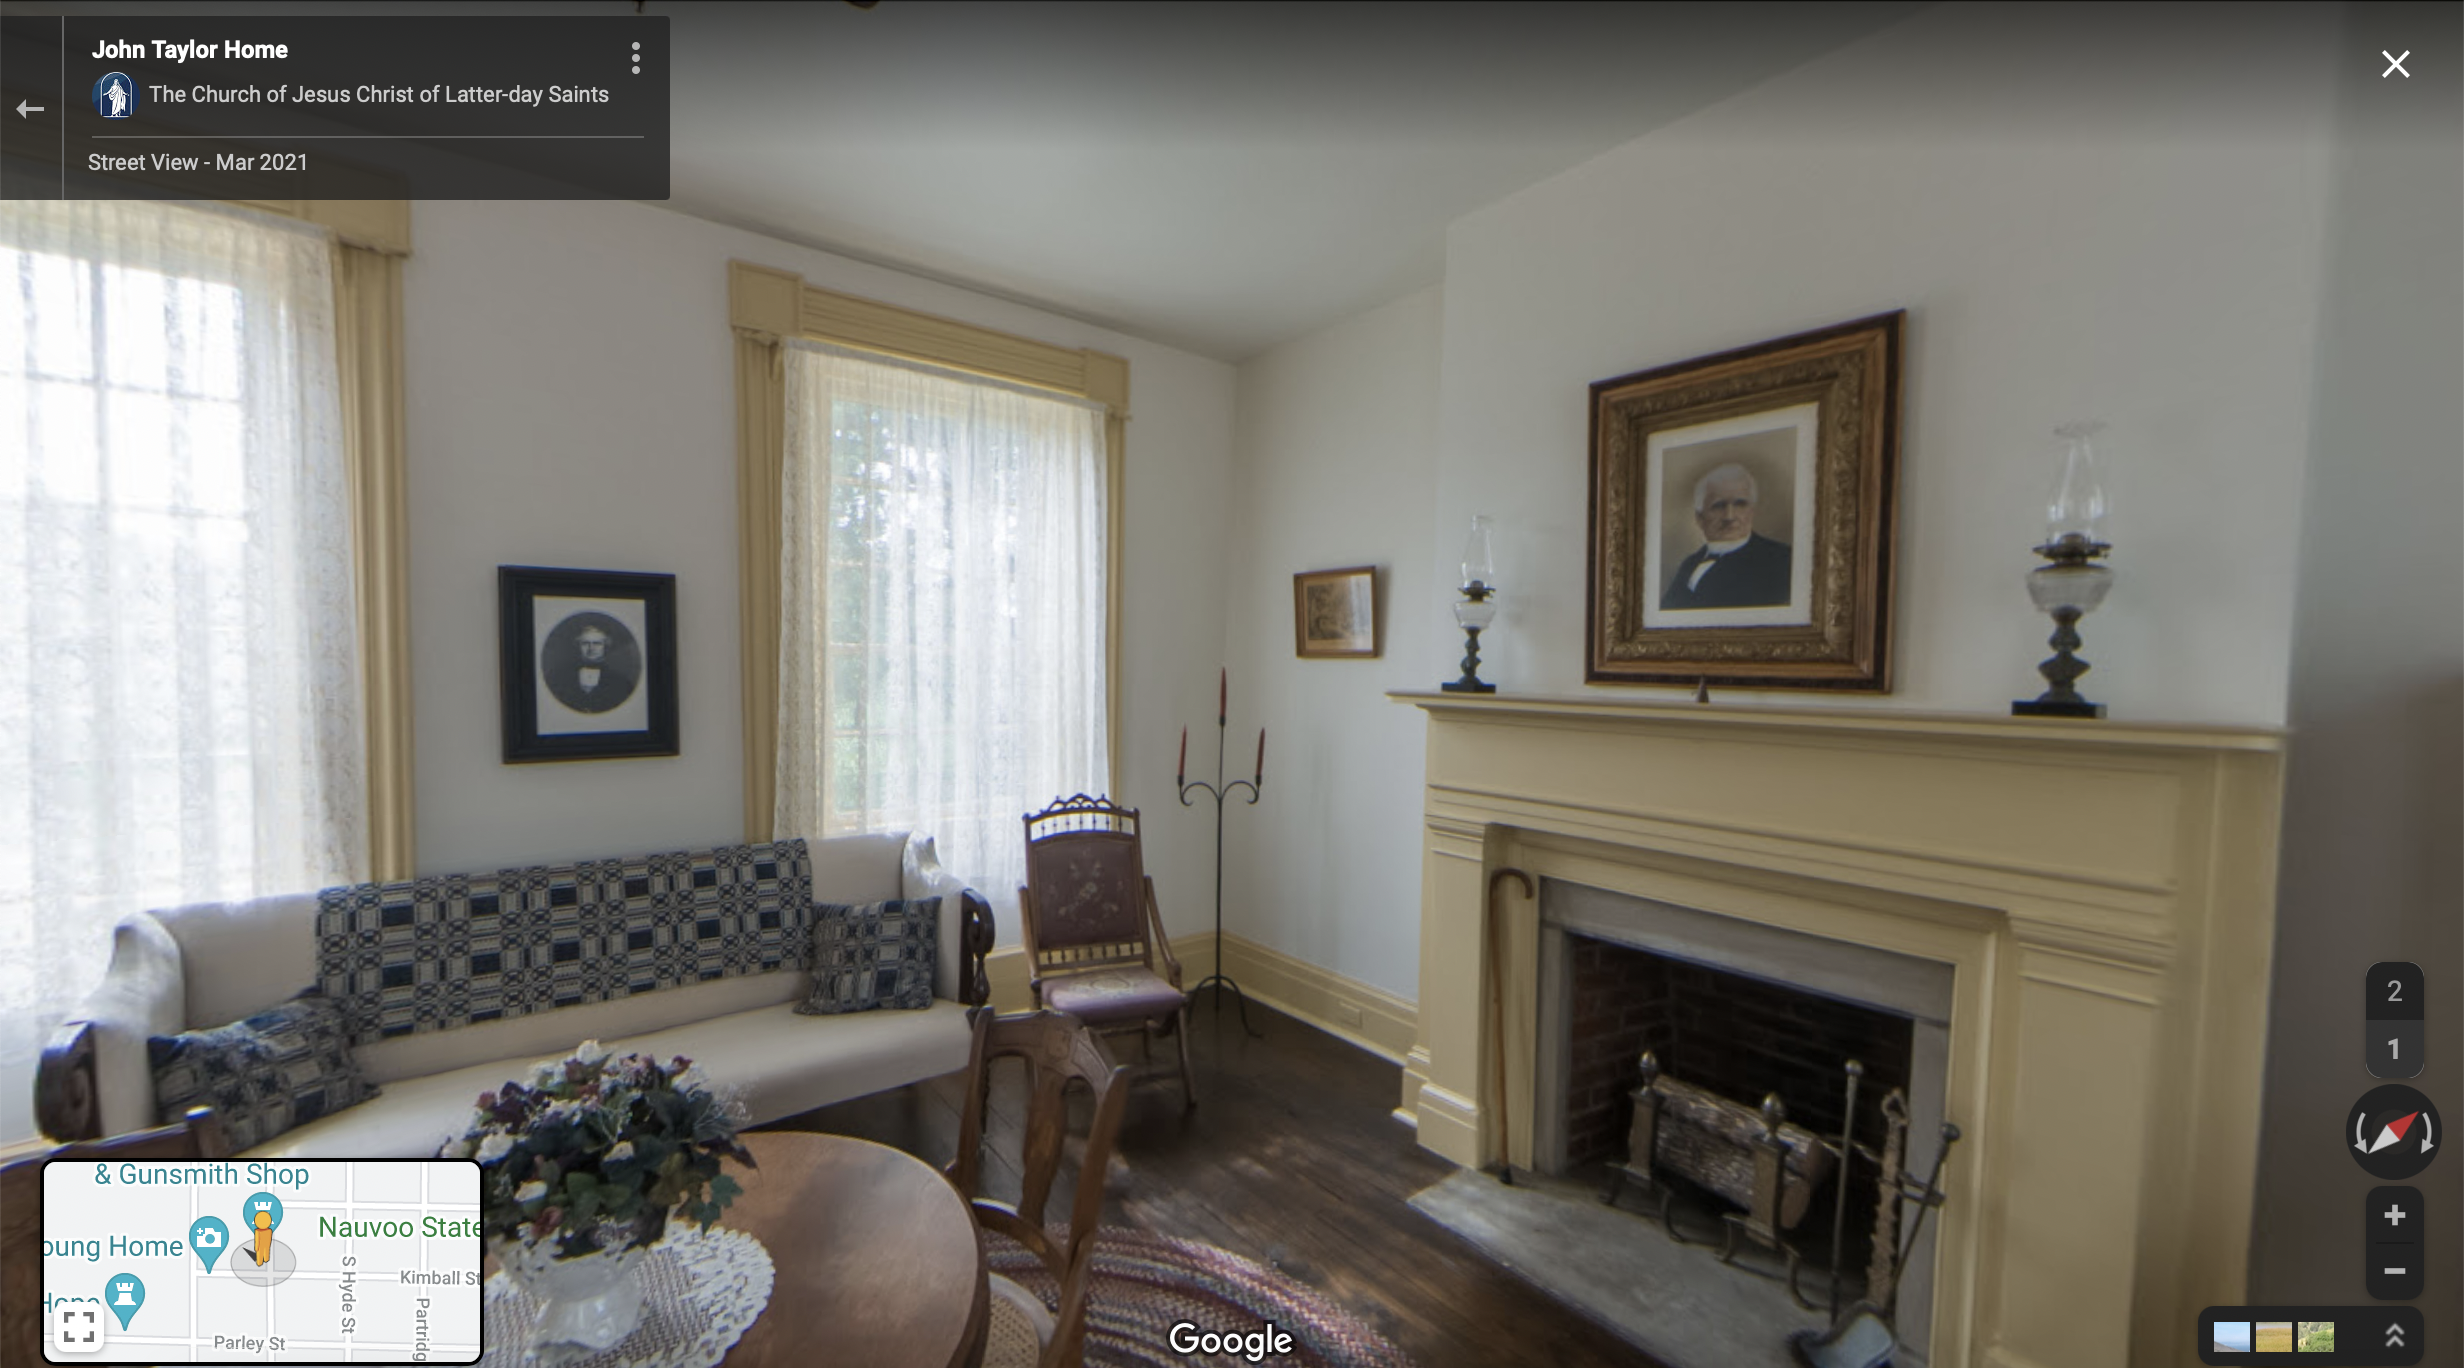 Screenshot of the Google Maps 360 view of the John Taylor home in Nauvoo